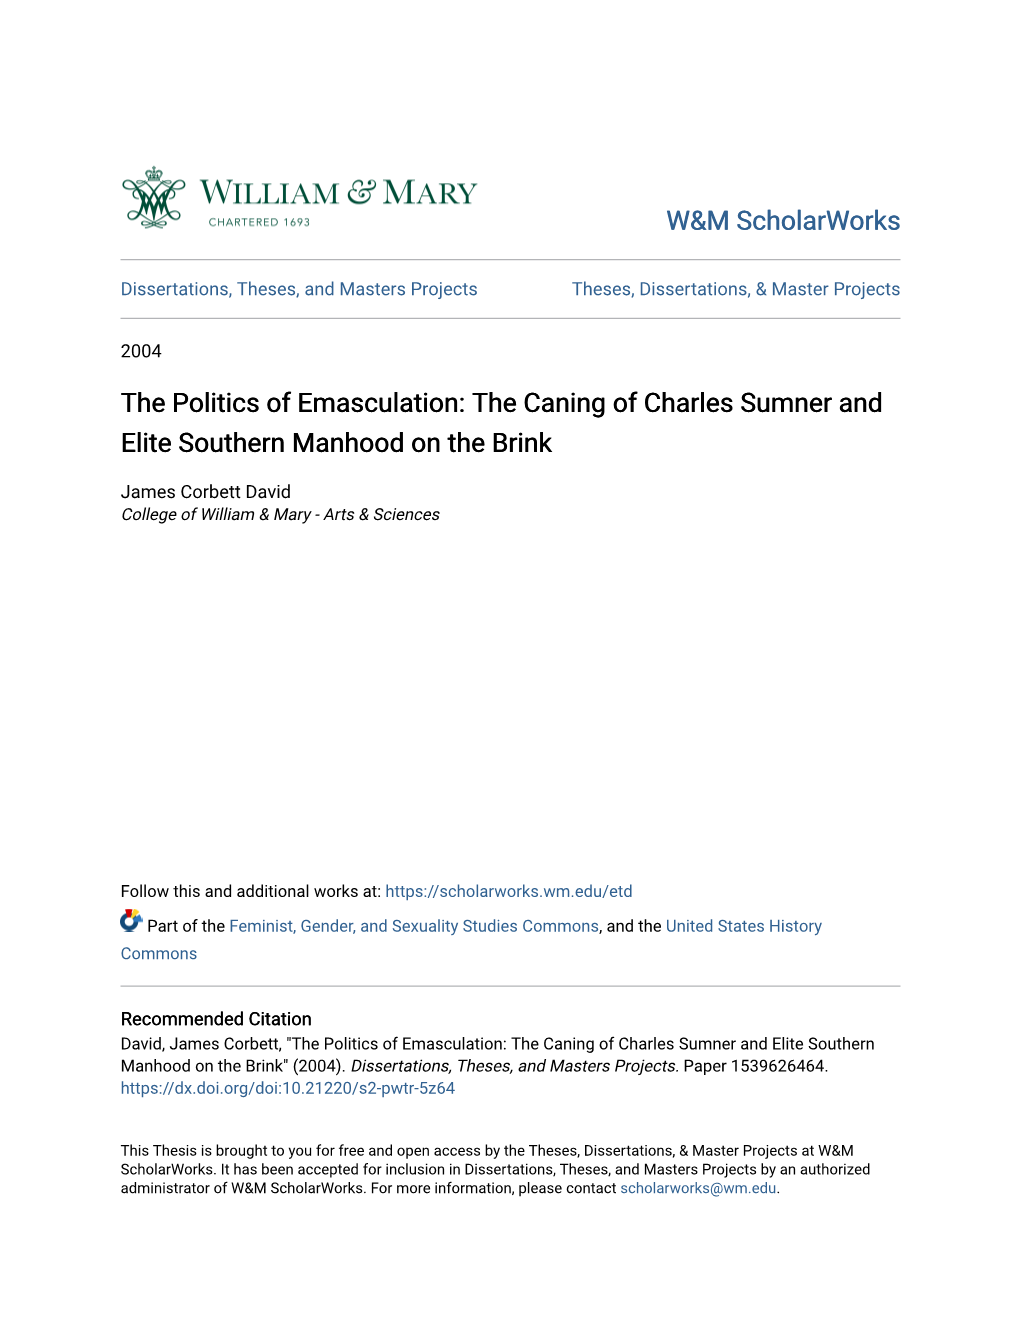 The Caning of Charles Sumner and Elite Southern Manhood on the Brink